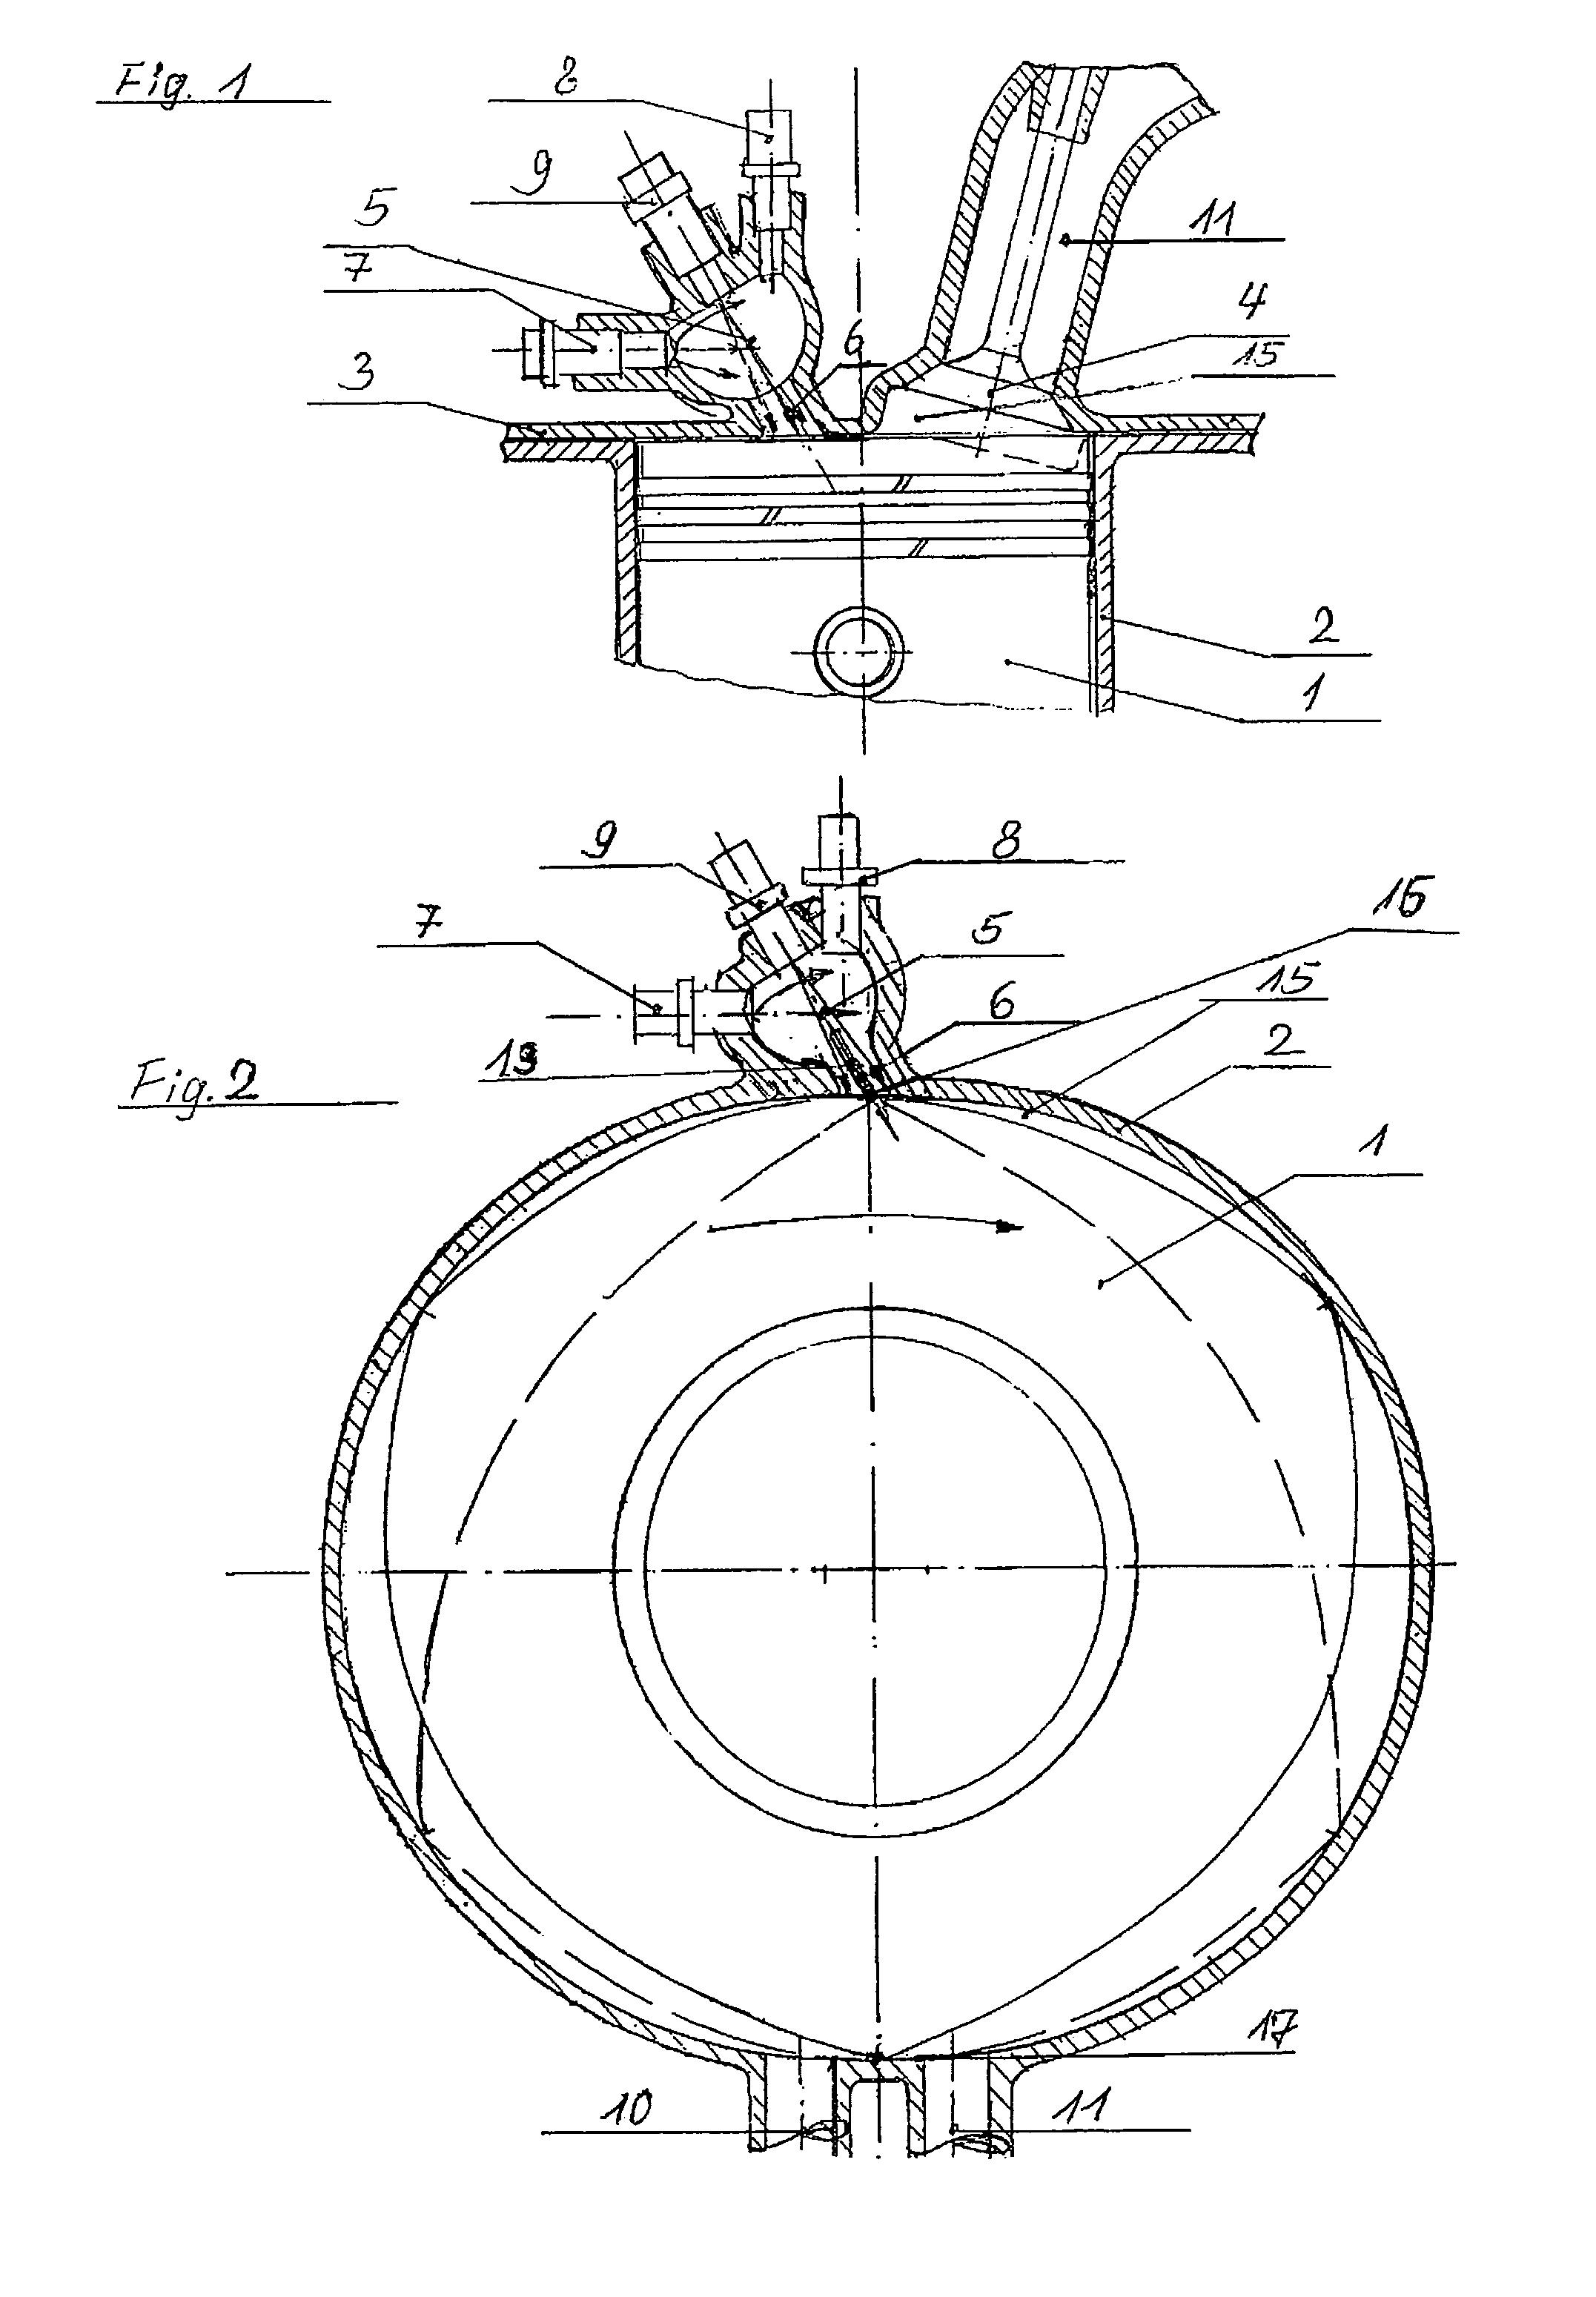 High compression spark-ignition engine with throttle control, externally supplied ignition, and direct fuel injection into a precombustion chamber